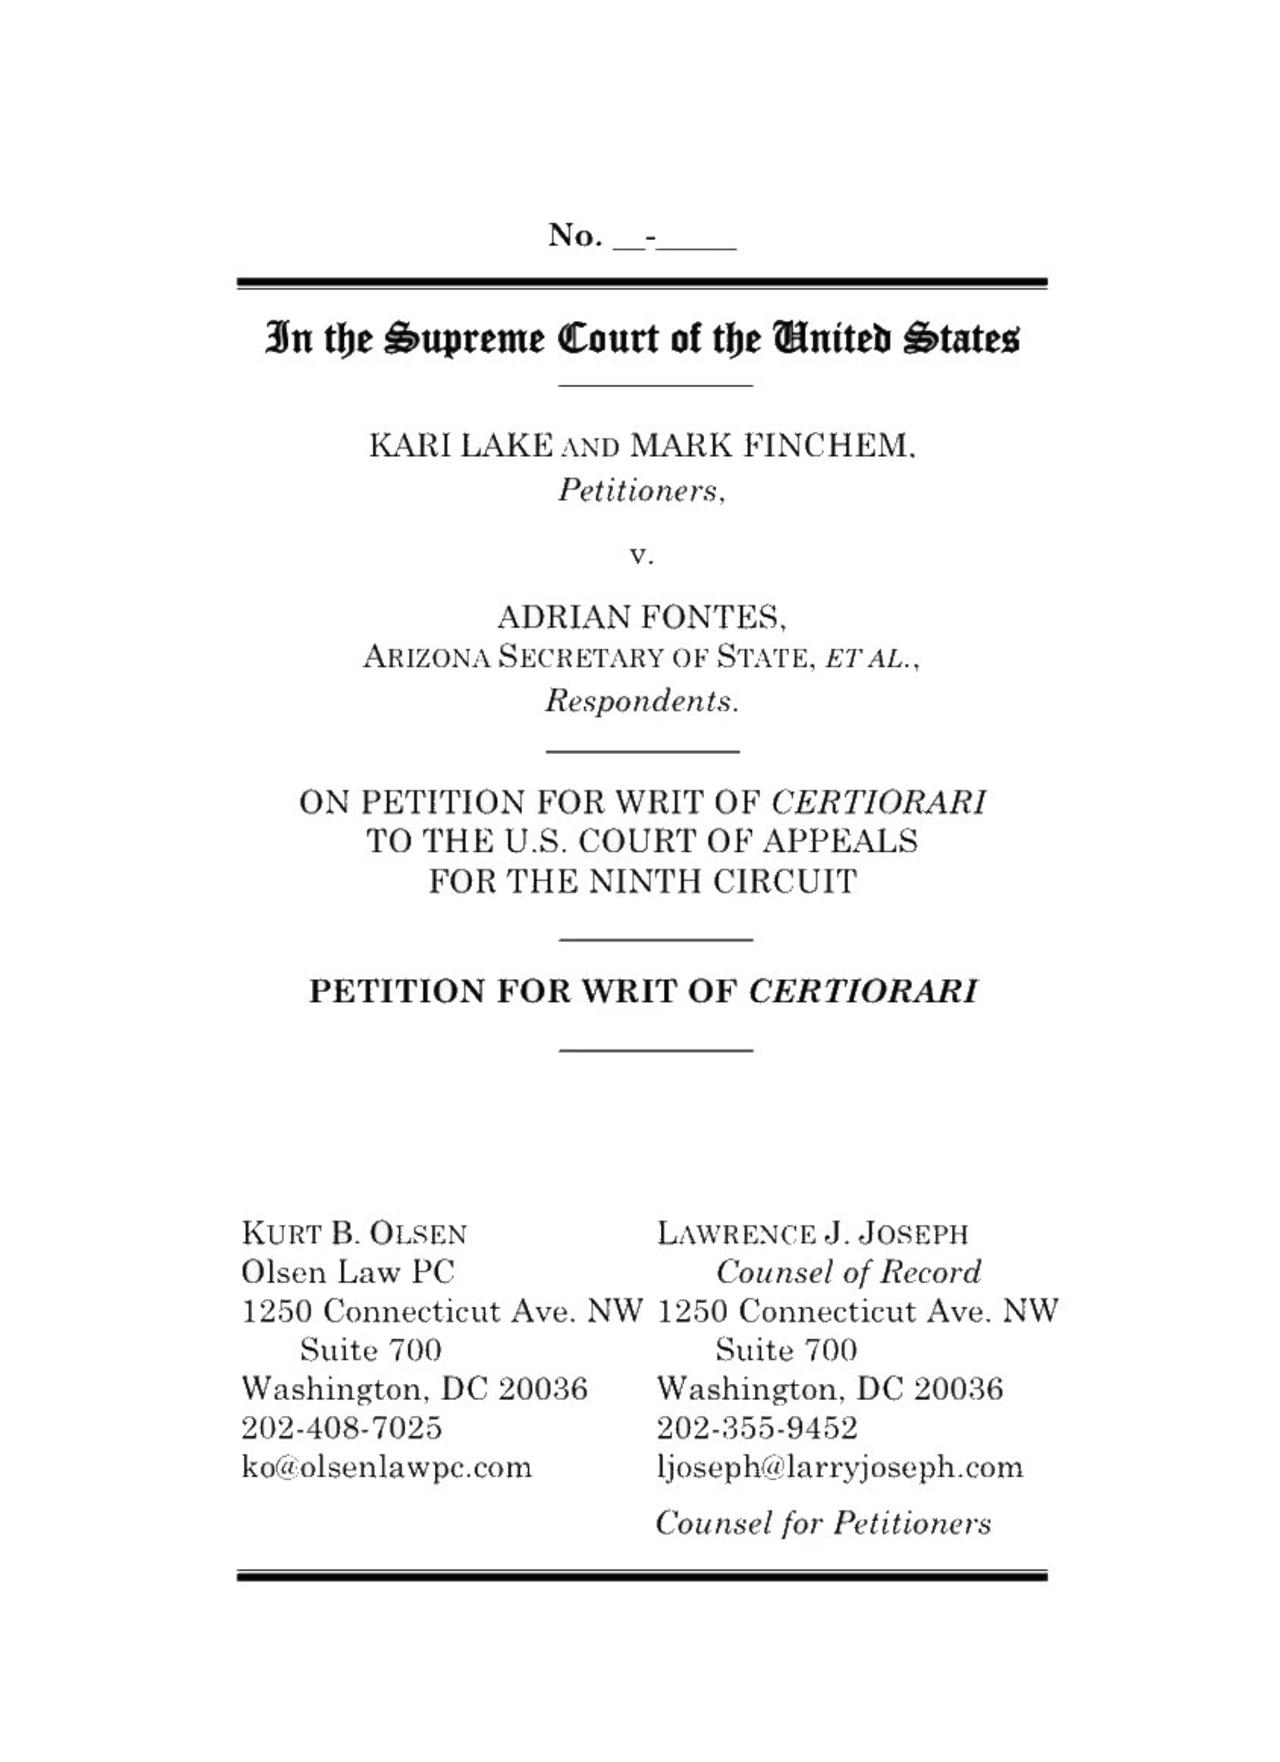 The Supreme Court Case Challenging the integrity of electronic voting machines has been filed